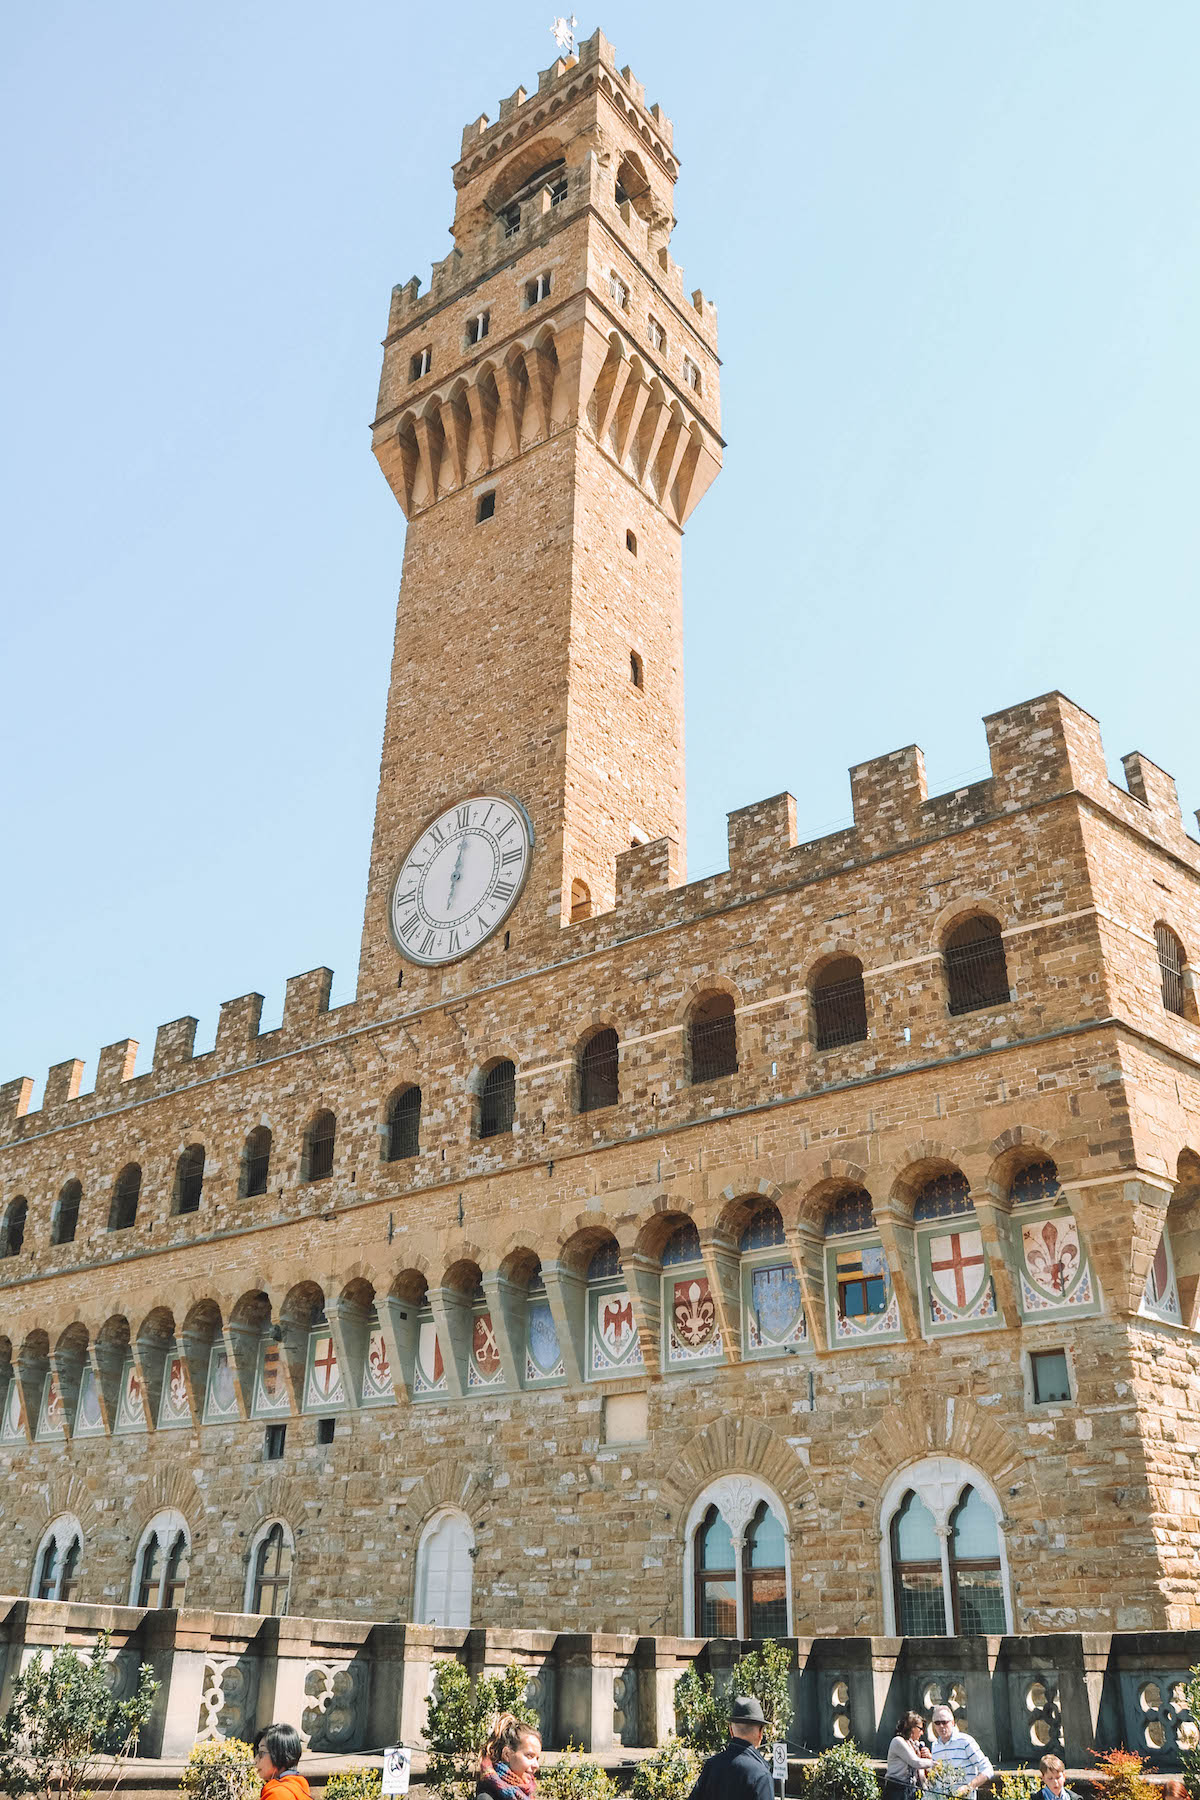 The Palazzo Vecchio in Florence, on a sunny day